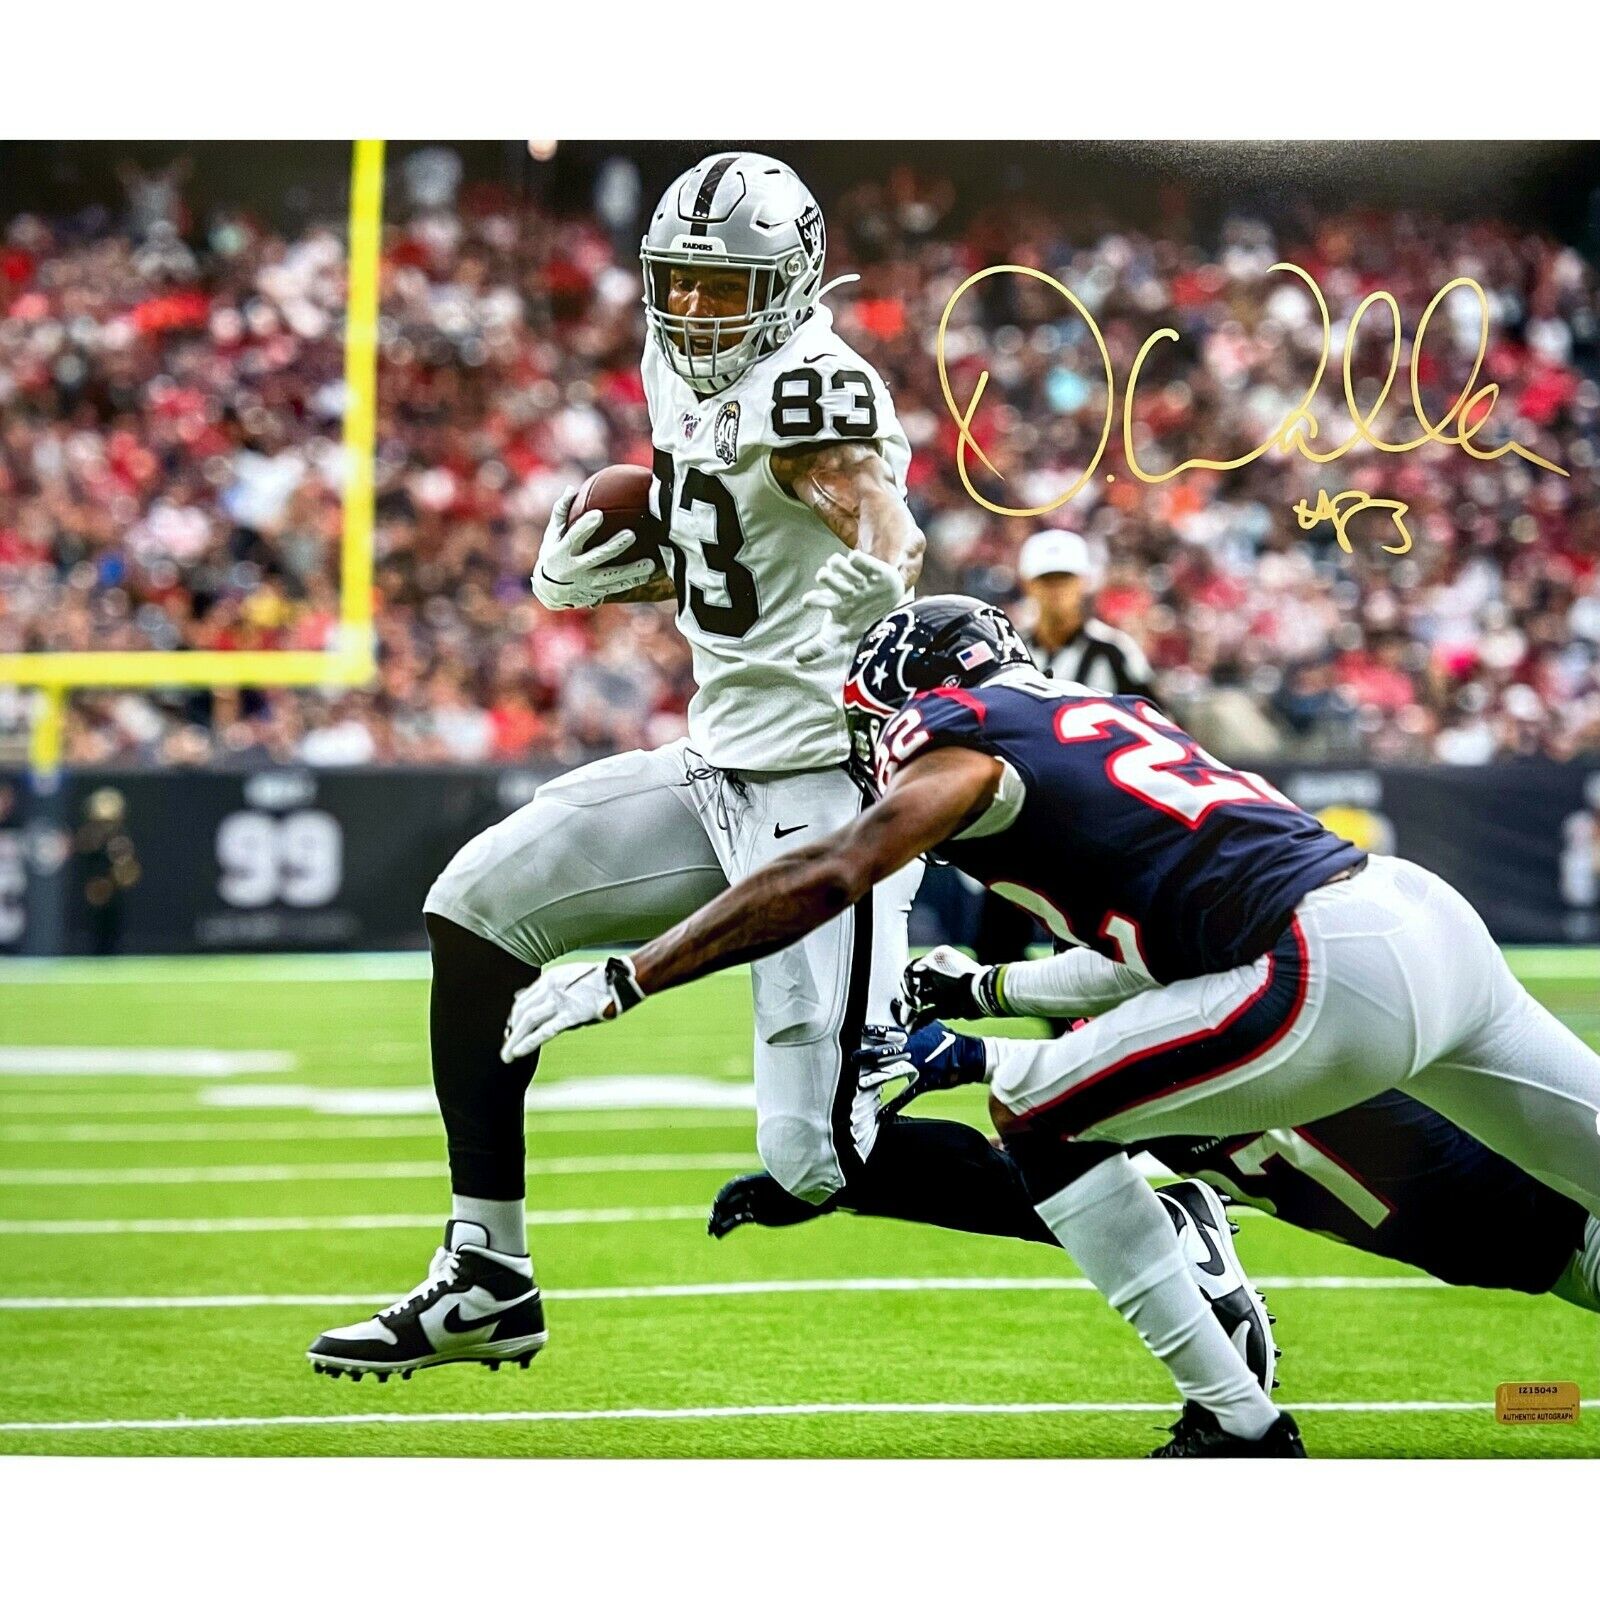 Darren Waller Autographed LV Raiders 16x20 Photo Poster painting Inscriptagraphs COA Signed Wht